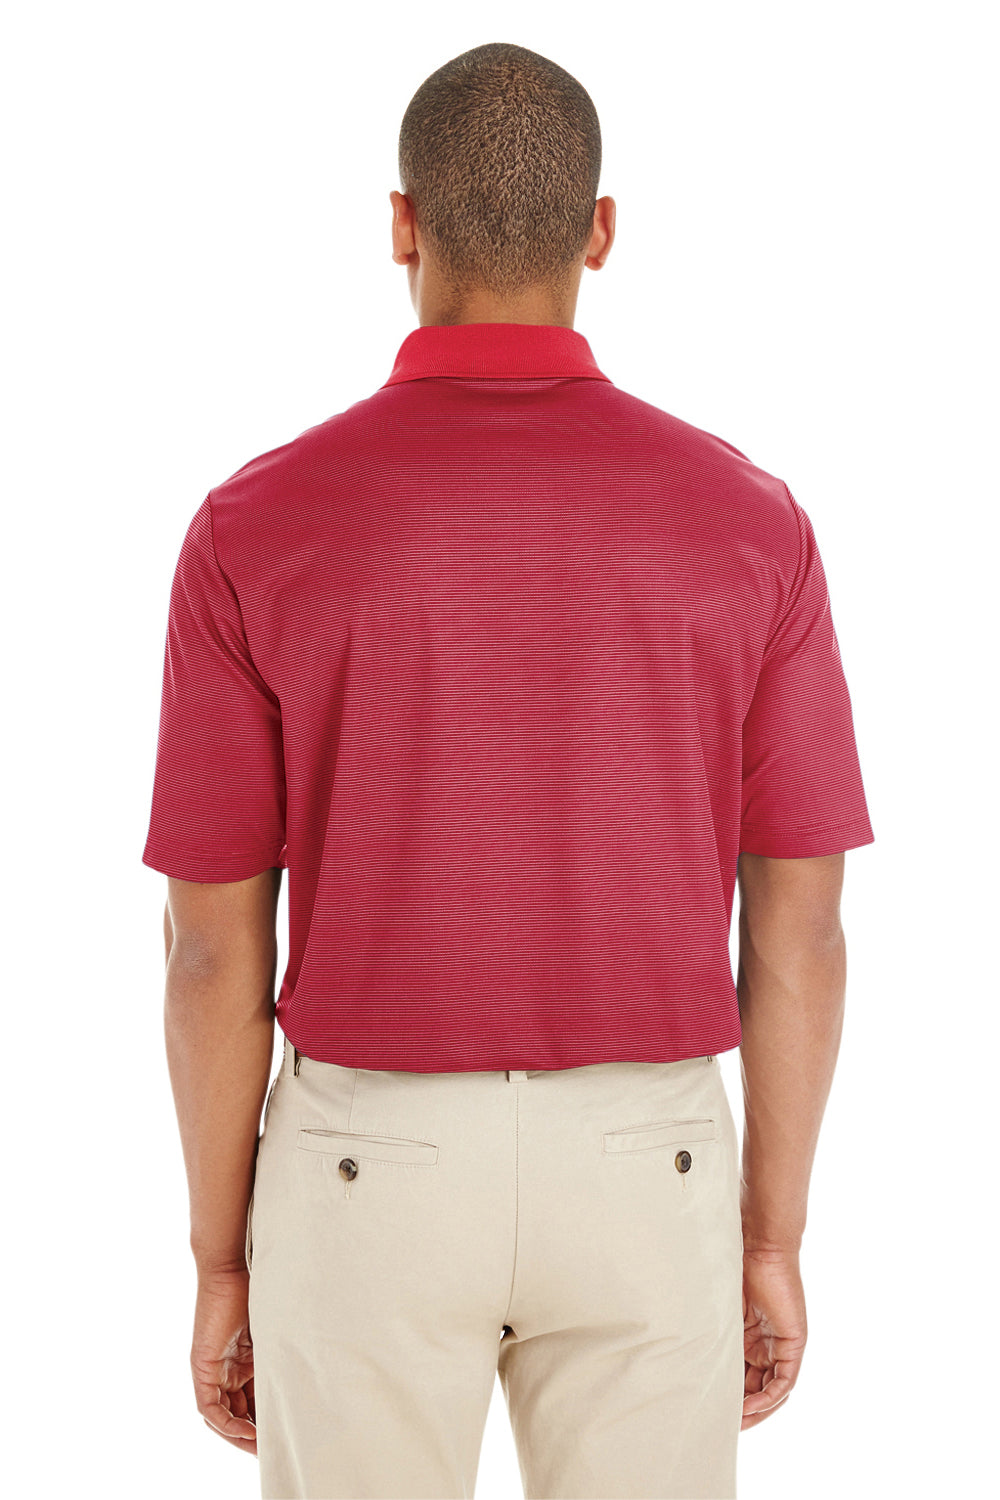 Core 365 CE102 Mens Express Performance Moisture Wicking Short Sleeve Polo Shirt Red Back